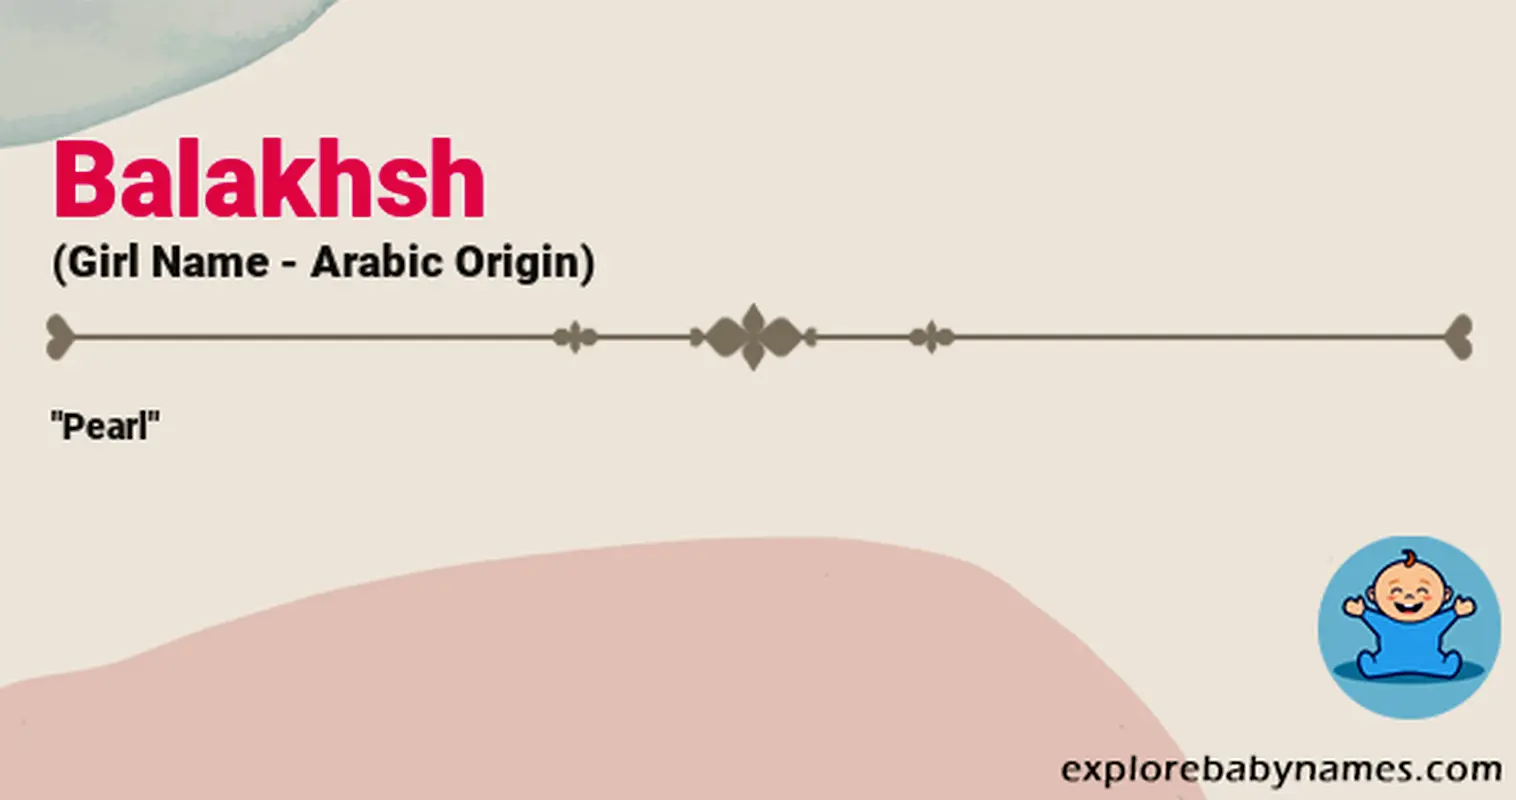 Meaning of Balakhsh